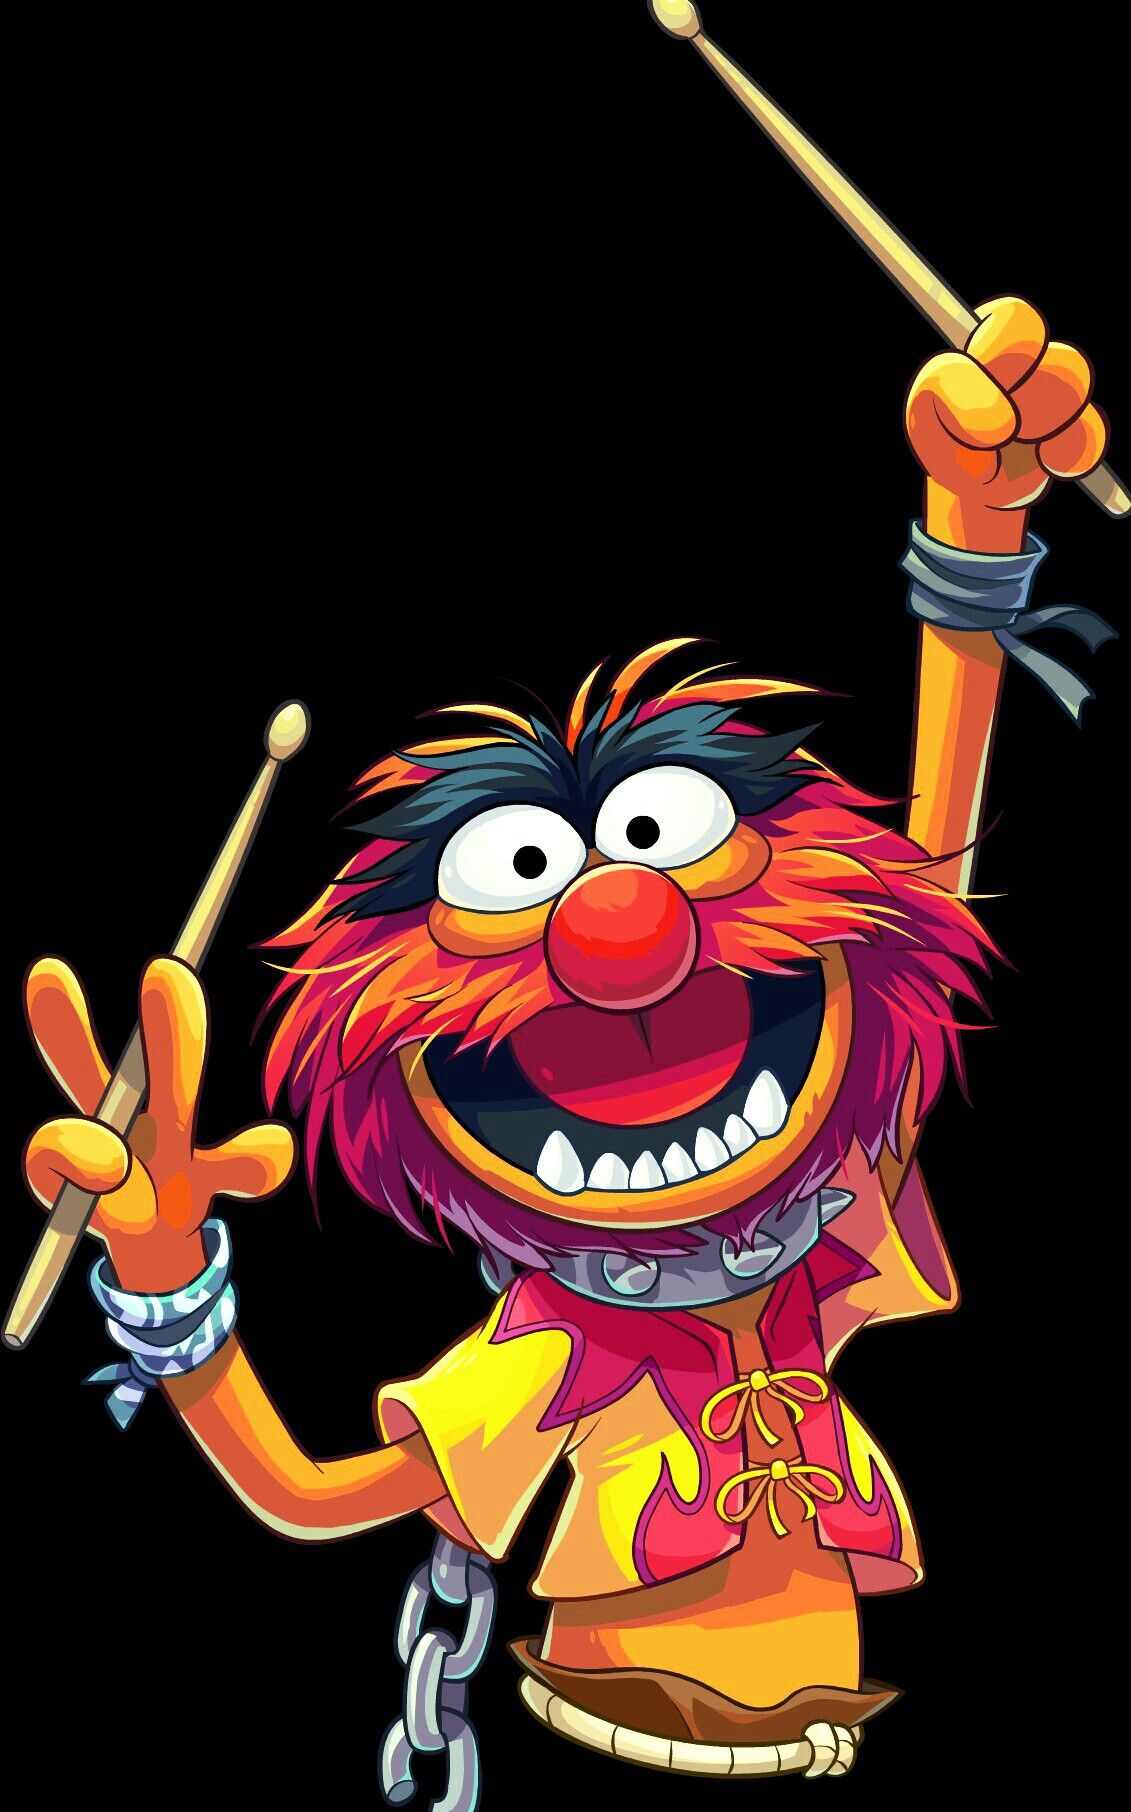 ANIMAL DRUMMER ideas. animal muppet, muppets, the muppet show